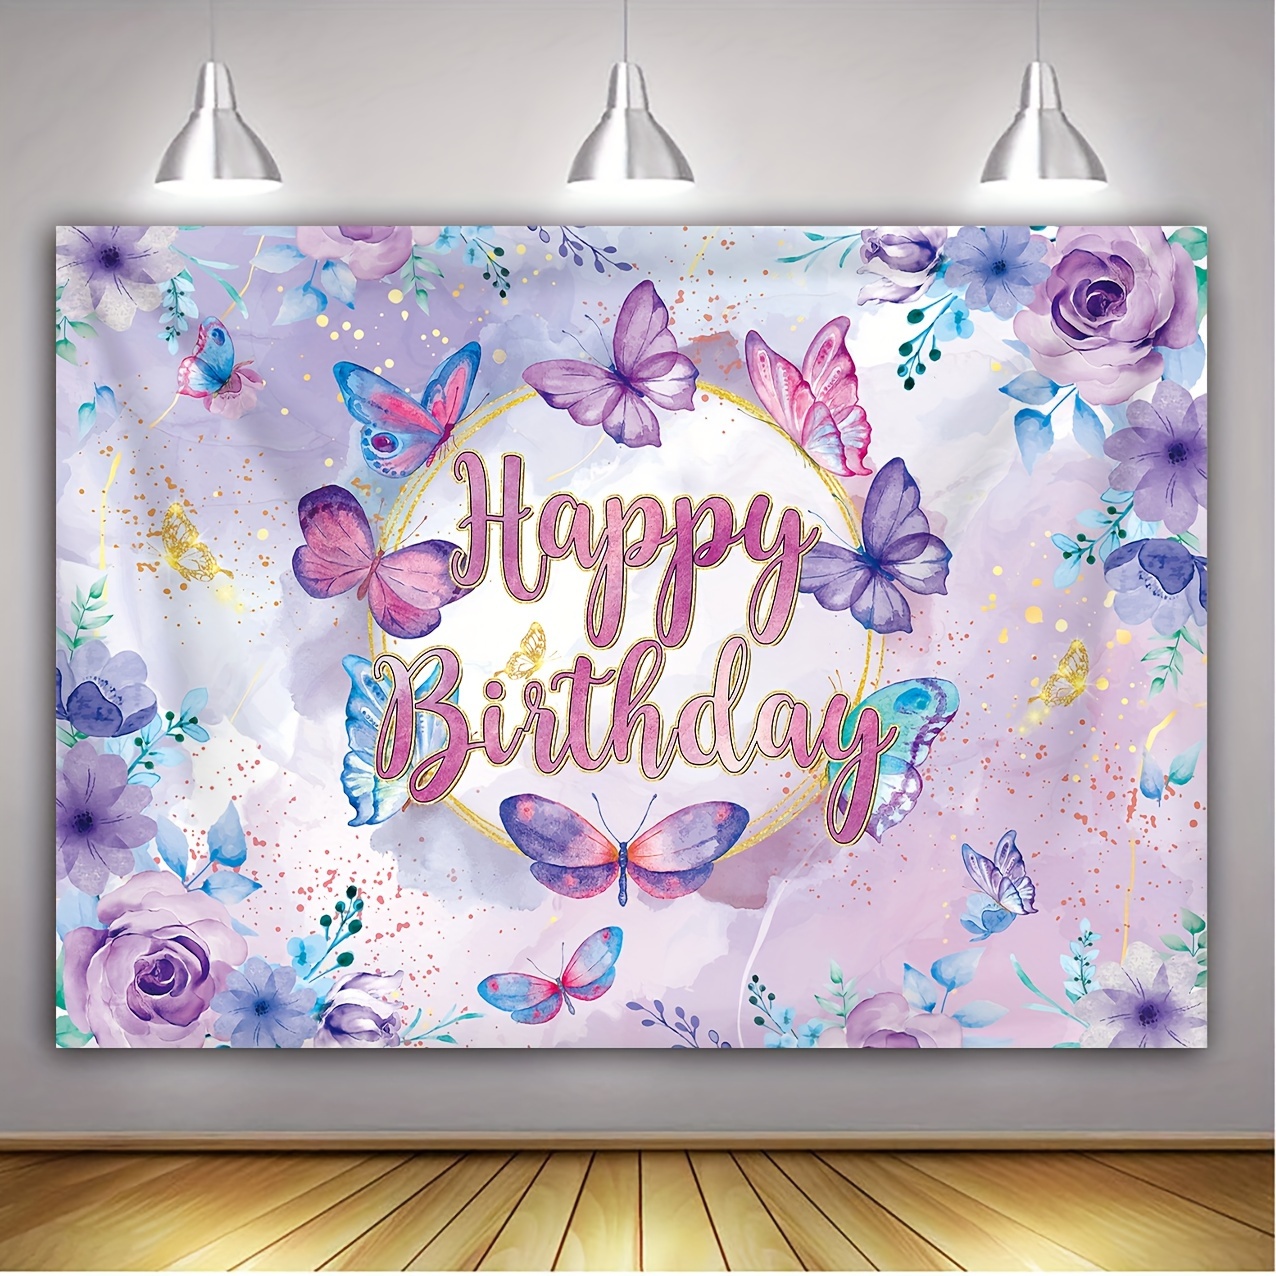 

Meashowltd Purple Butterfly & Floral Glitter Birthday Backdrop - Polyester Photography Background For Girls' Spring-themed Celebrations, Photo Booth Props & Room Decor Butterfly Party Decorations